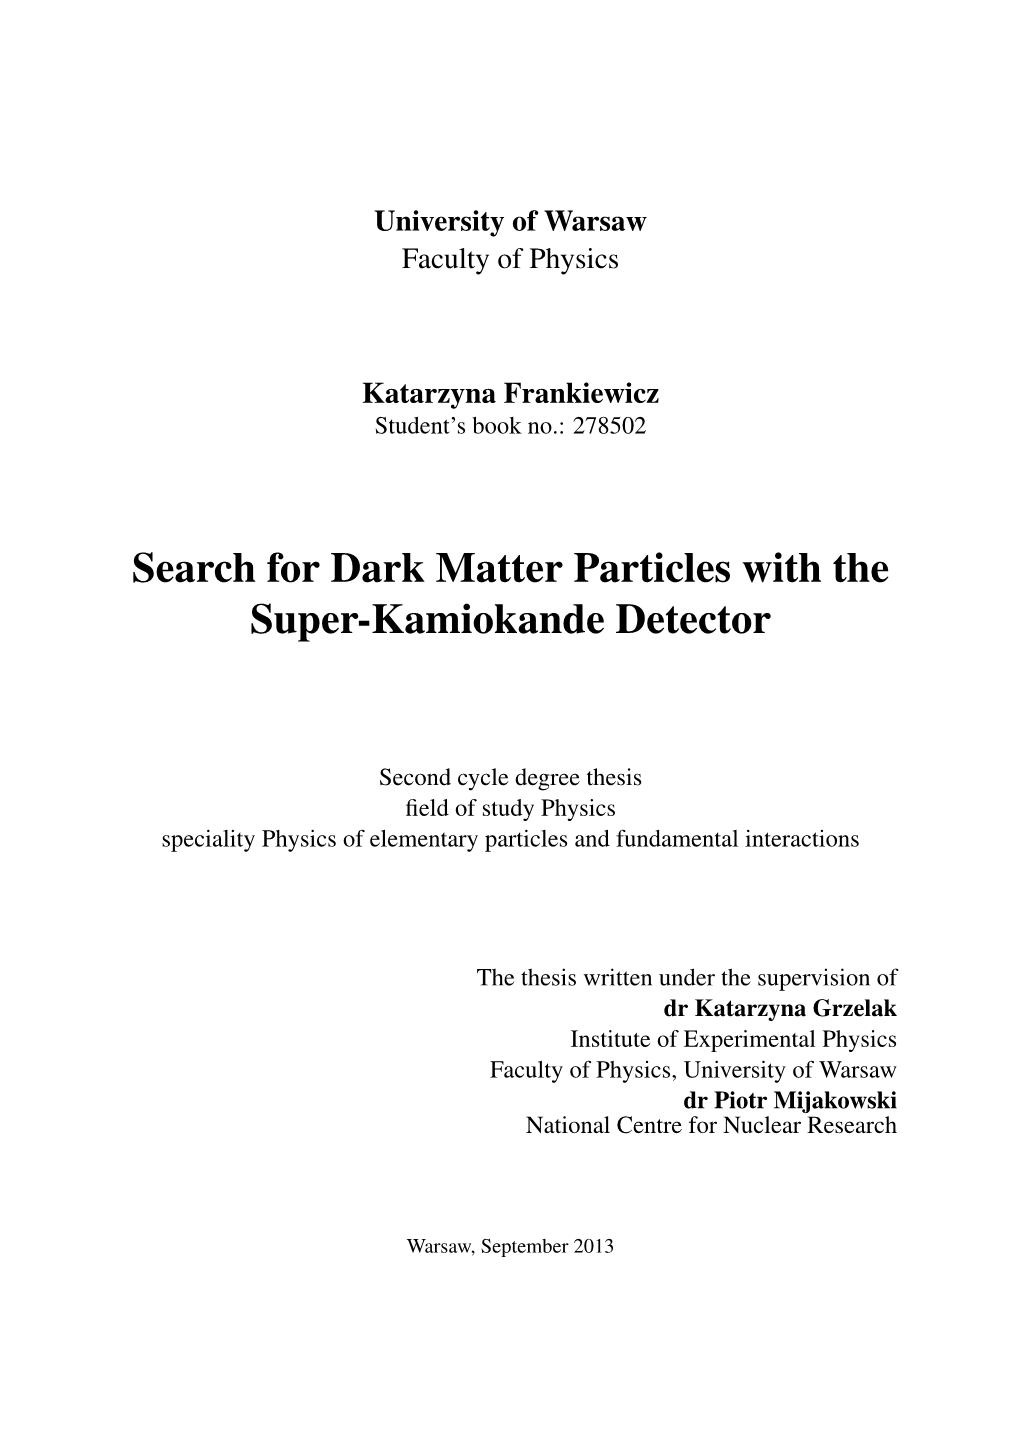 Search for Dark Matter Particles with the Super-Kamiokande Detector